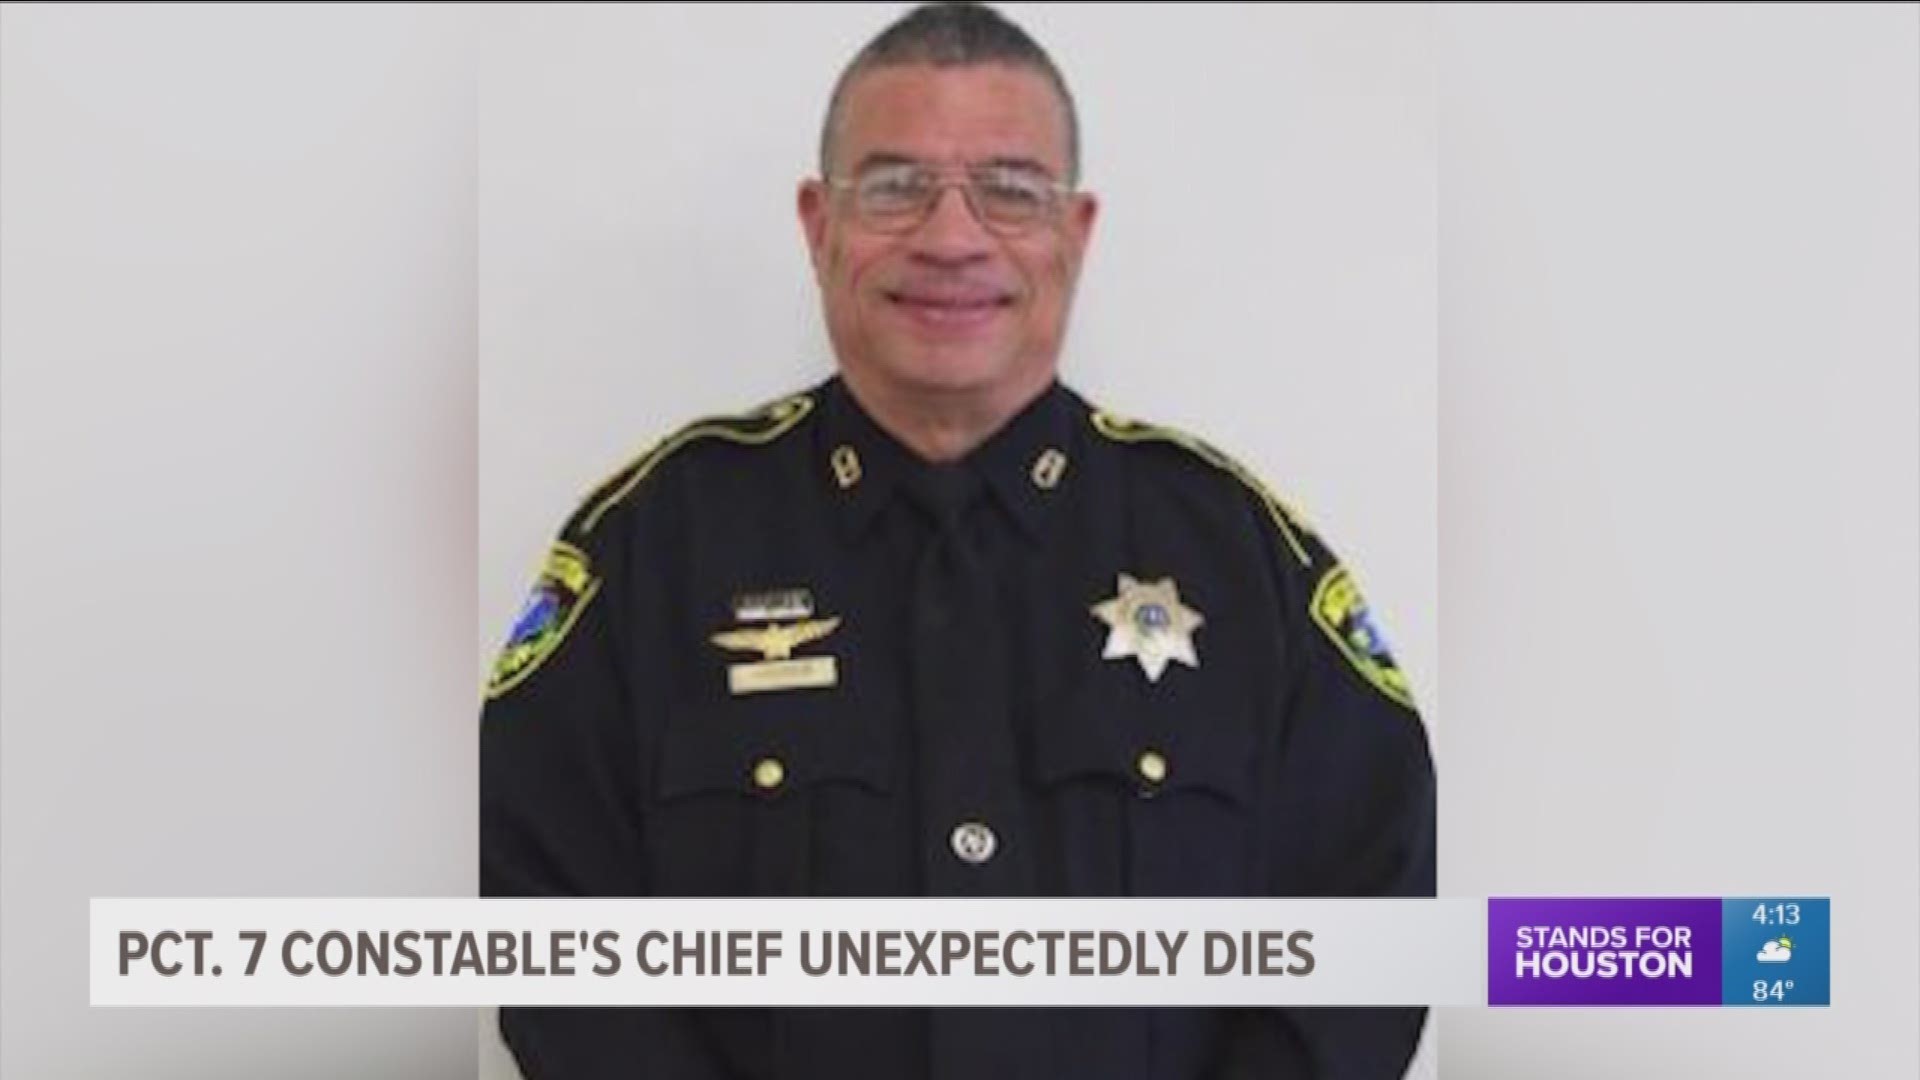 The Harris County Constable's Office is mourning the loss of one of their own after an unexpected death on Tuesday.